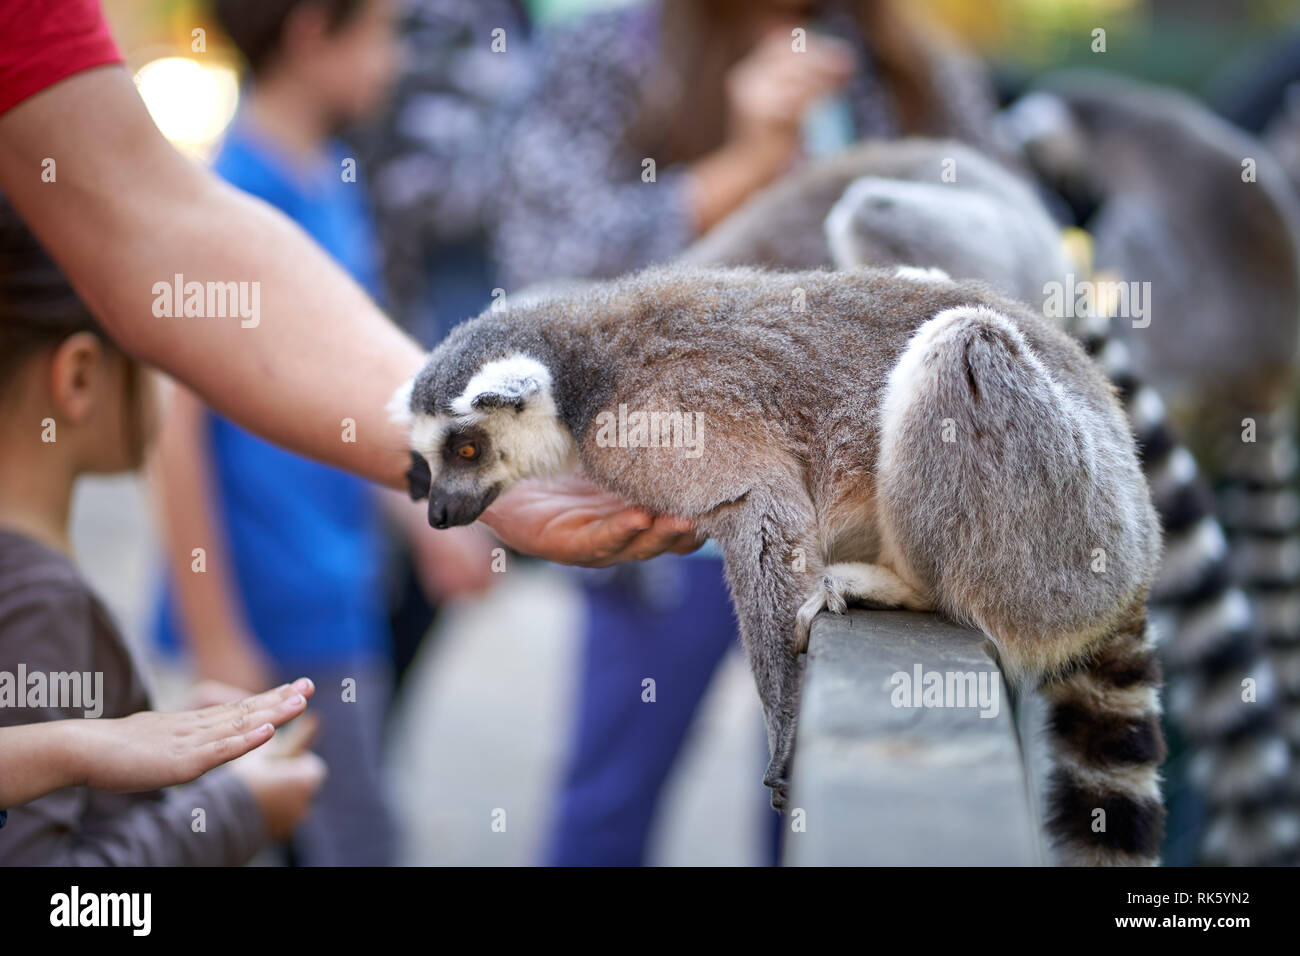 Feeding and petting lemurs in the zoo Stock Photo